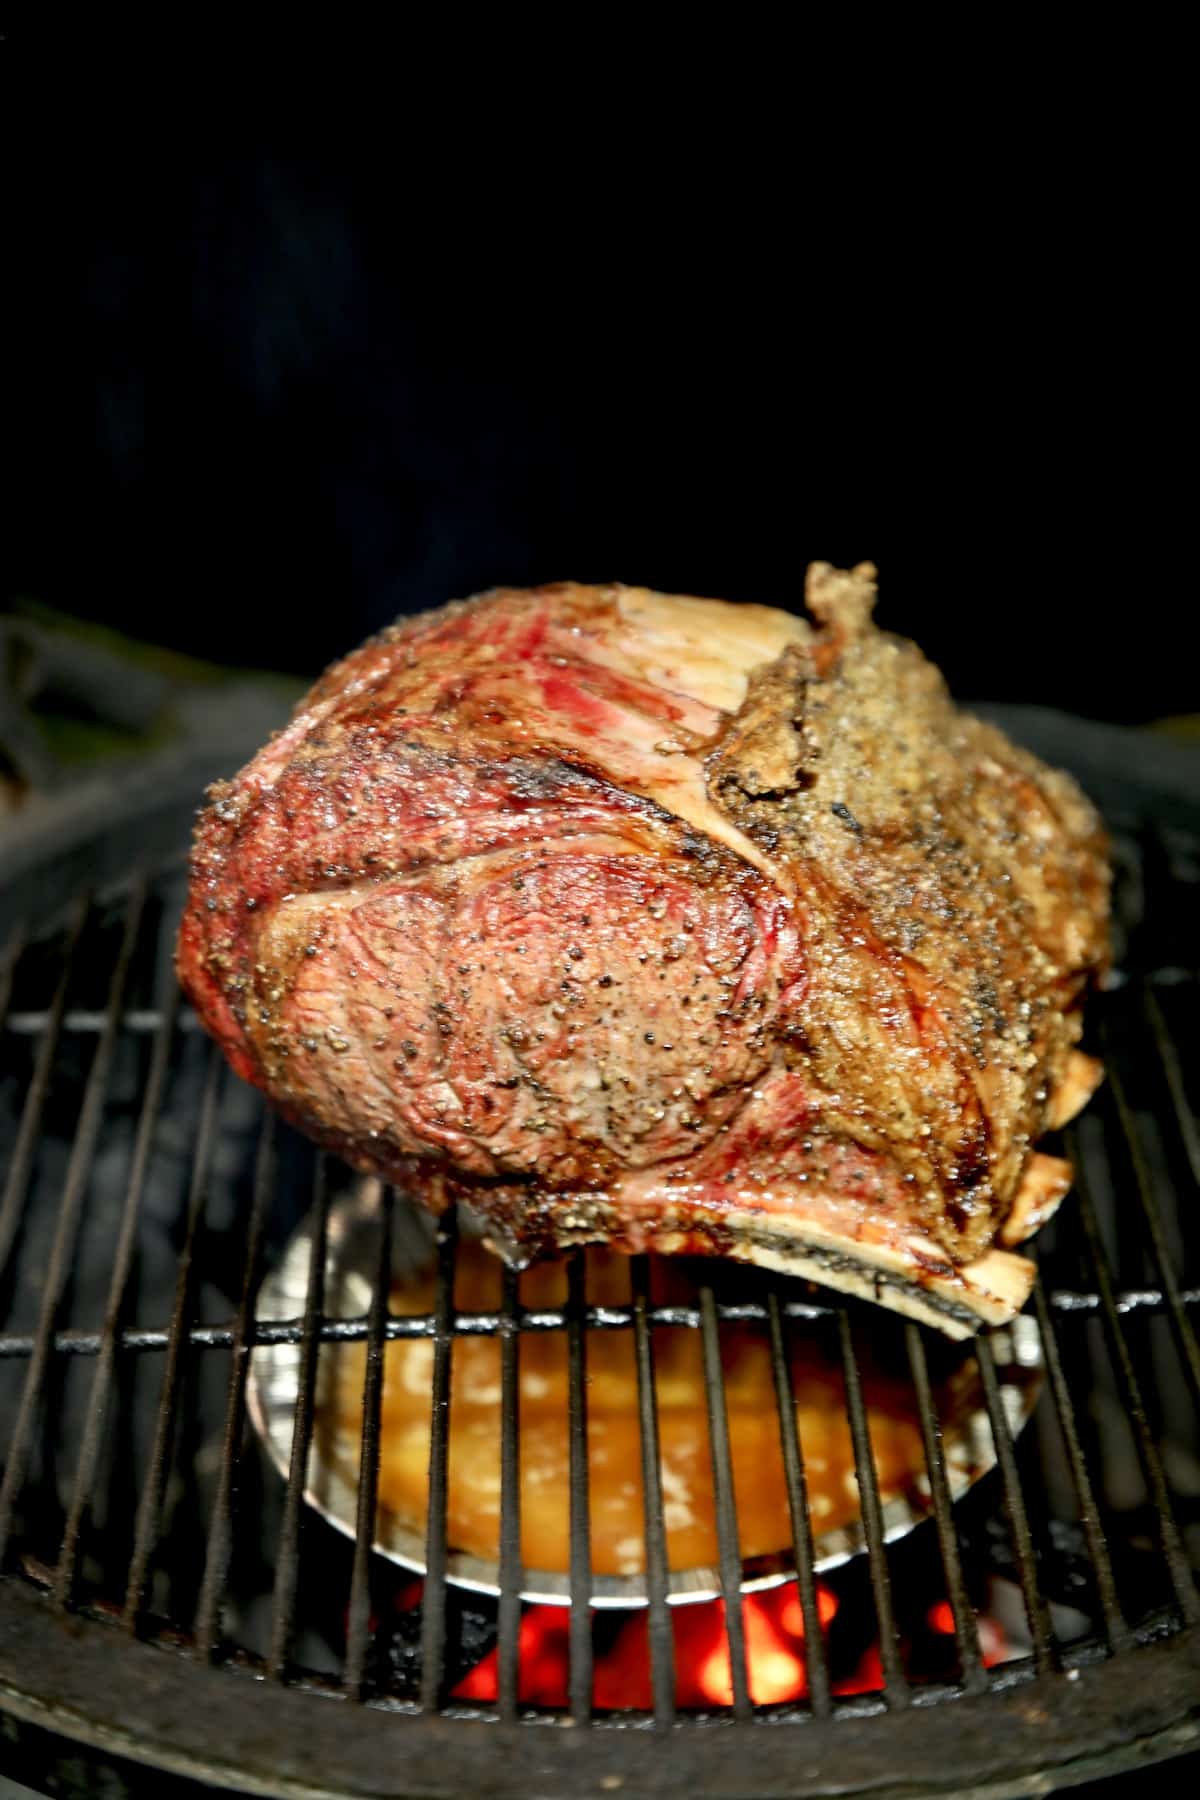 Prime Rib Roast grilled on a ceramic grill.